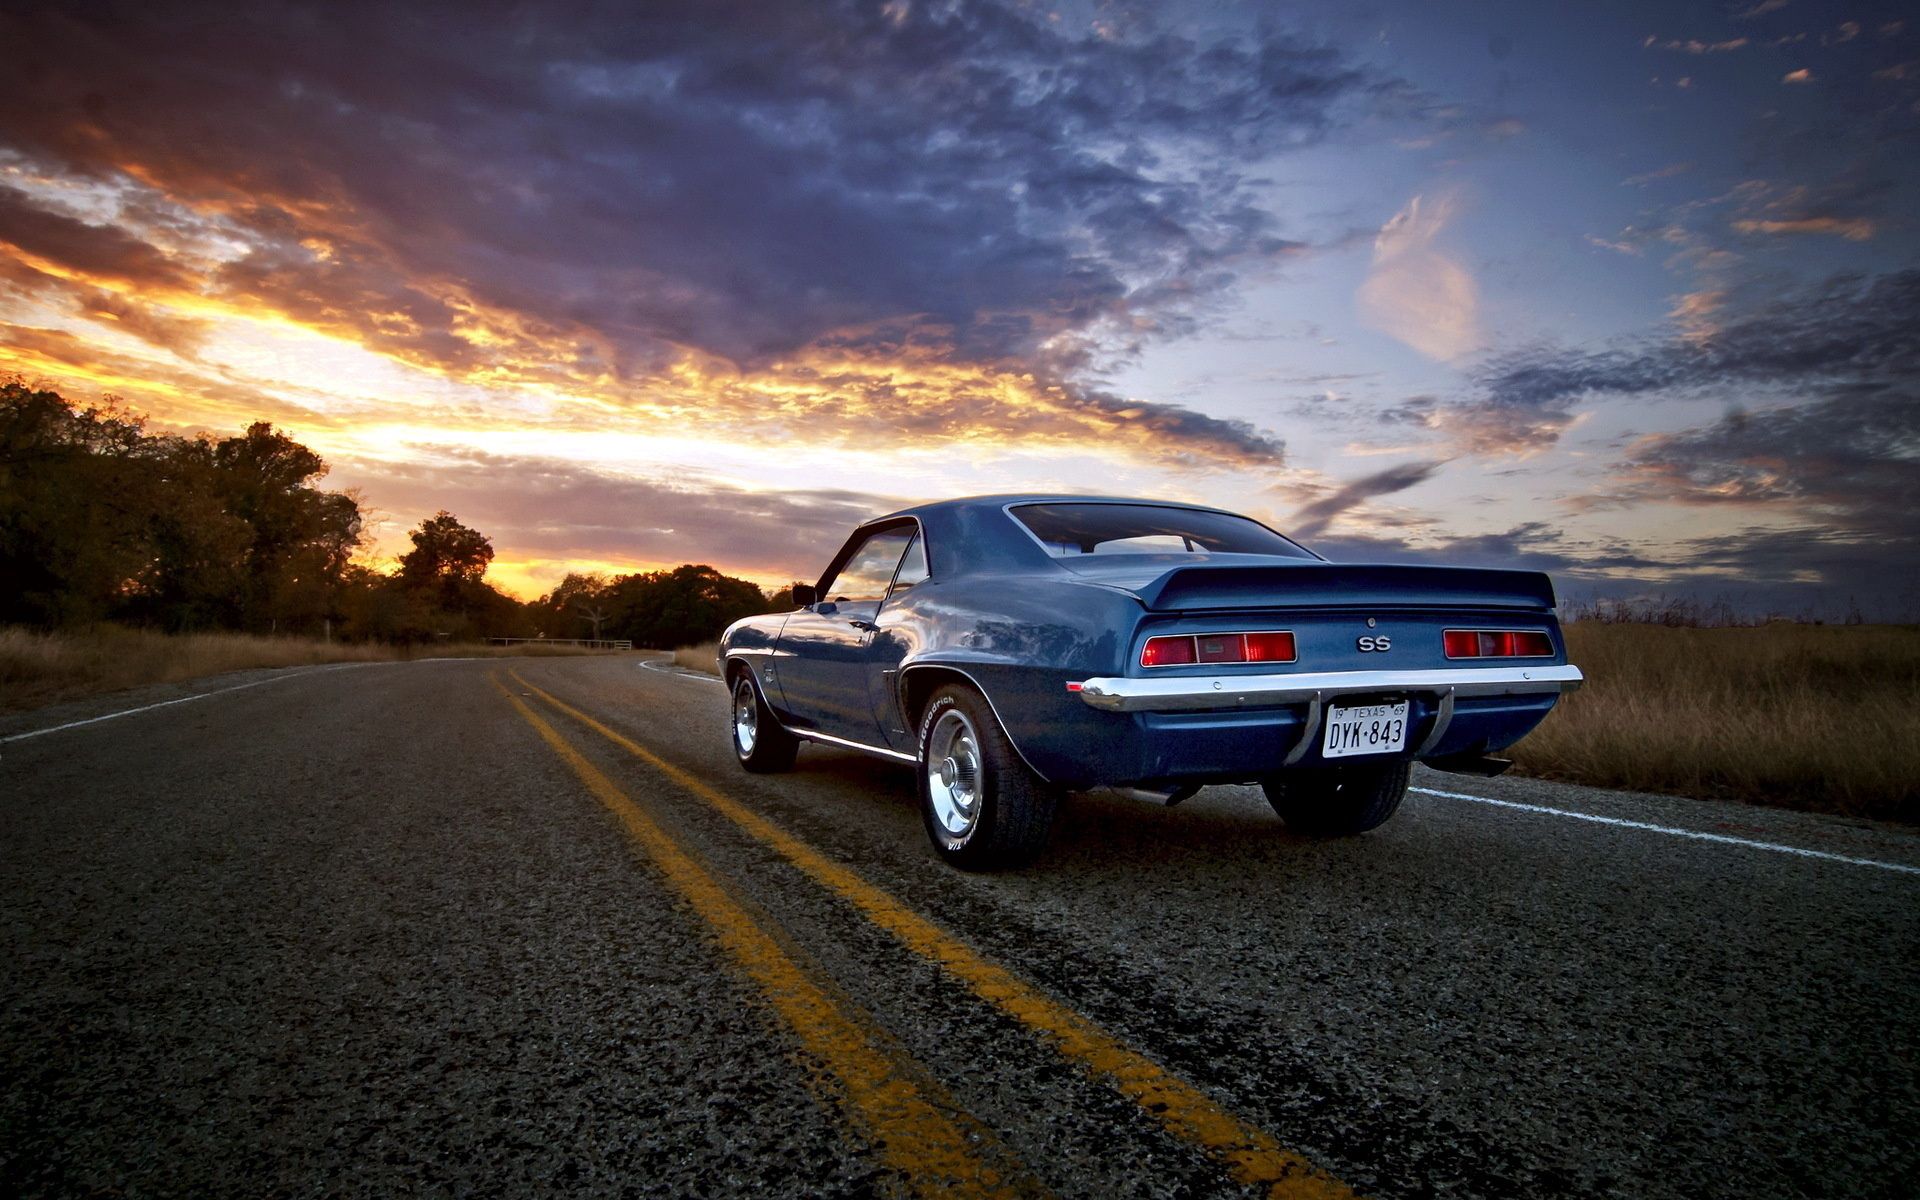 112140 download wallpaper cars, sunset, road, camaro screensavers and pictures for free